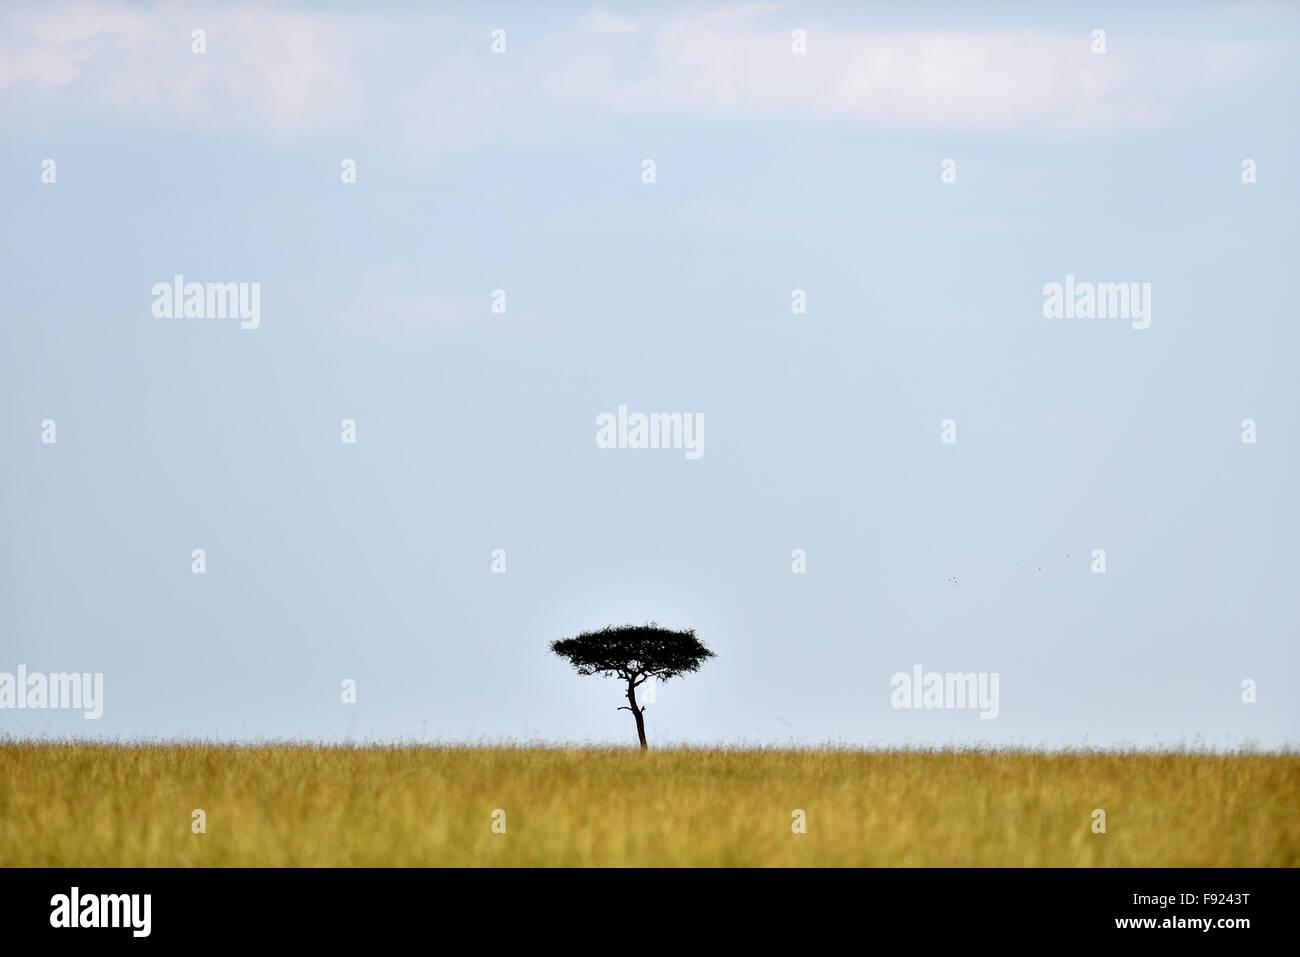 (151213) -- MASAI MARA, Dec. 13, 2015 (Xinhua) -- Photo taken on Aug. 14, 2015 shows the tropical grassland with few tress which is typical landscape of East African savanna in Kenya's Masai Mara National Reserve. As a country Kenya has considerable land area devoted to wildlife habitats. The tropical wet and dry climate created a vast tropical savanna for Kenya and for the wildlife to thrill. In return, the great savanna and the diverse wildlife brought the country a worldwide reputation. Alone in Masai Mara National Reserve, there are approximately 95 mammal species and 450 bird species. All Stock Photo